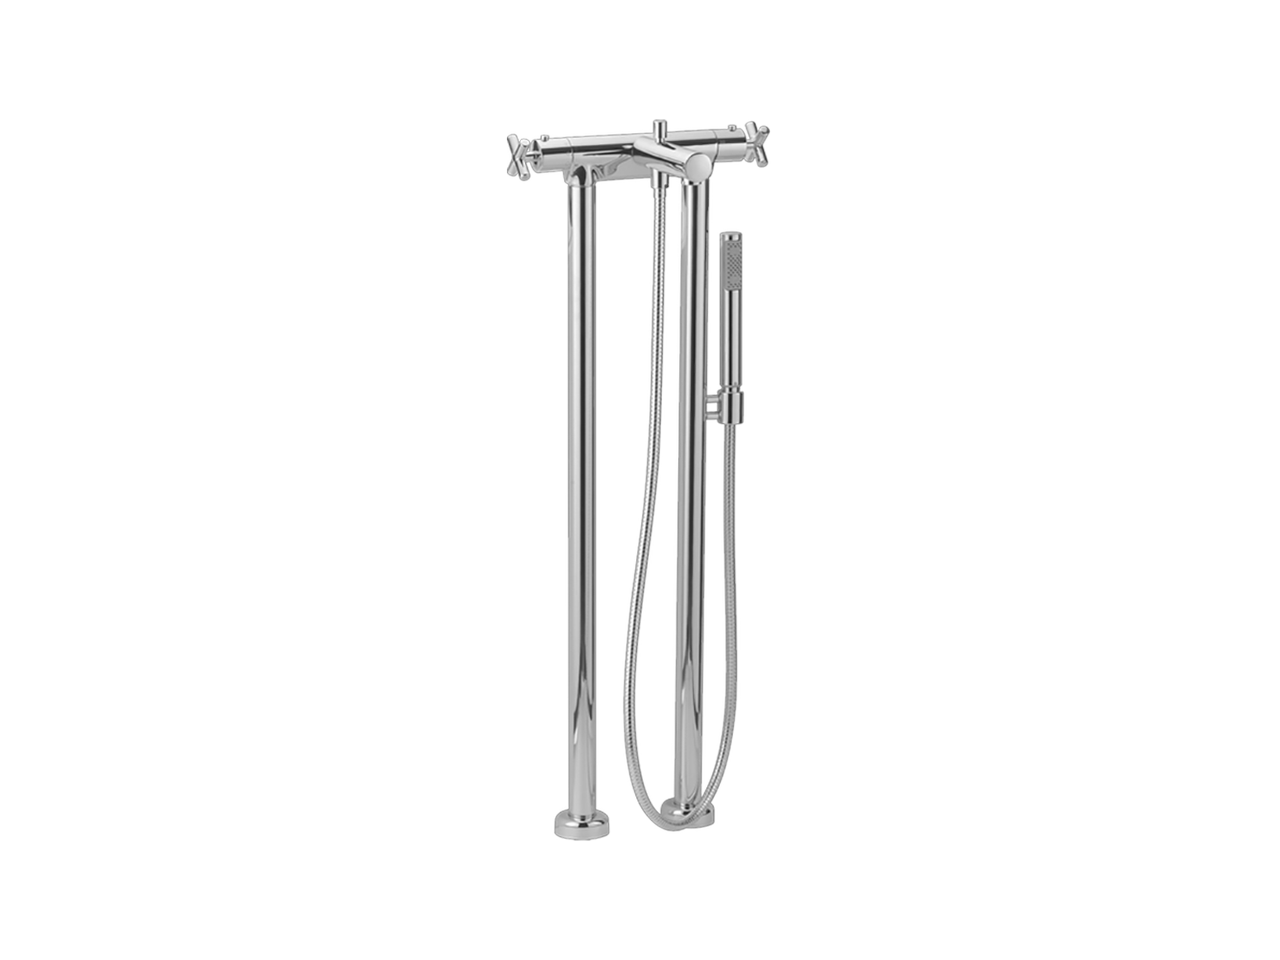 Thermostatic floor-mounted bath mixer SUITE - v1